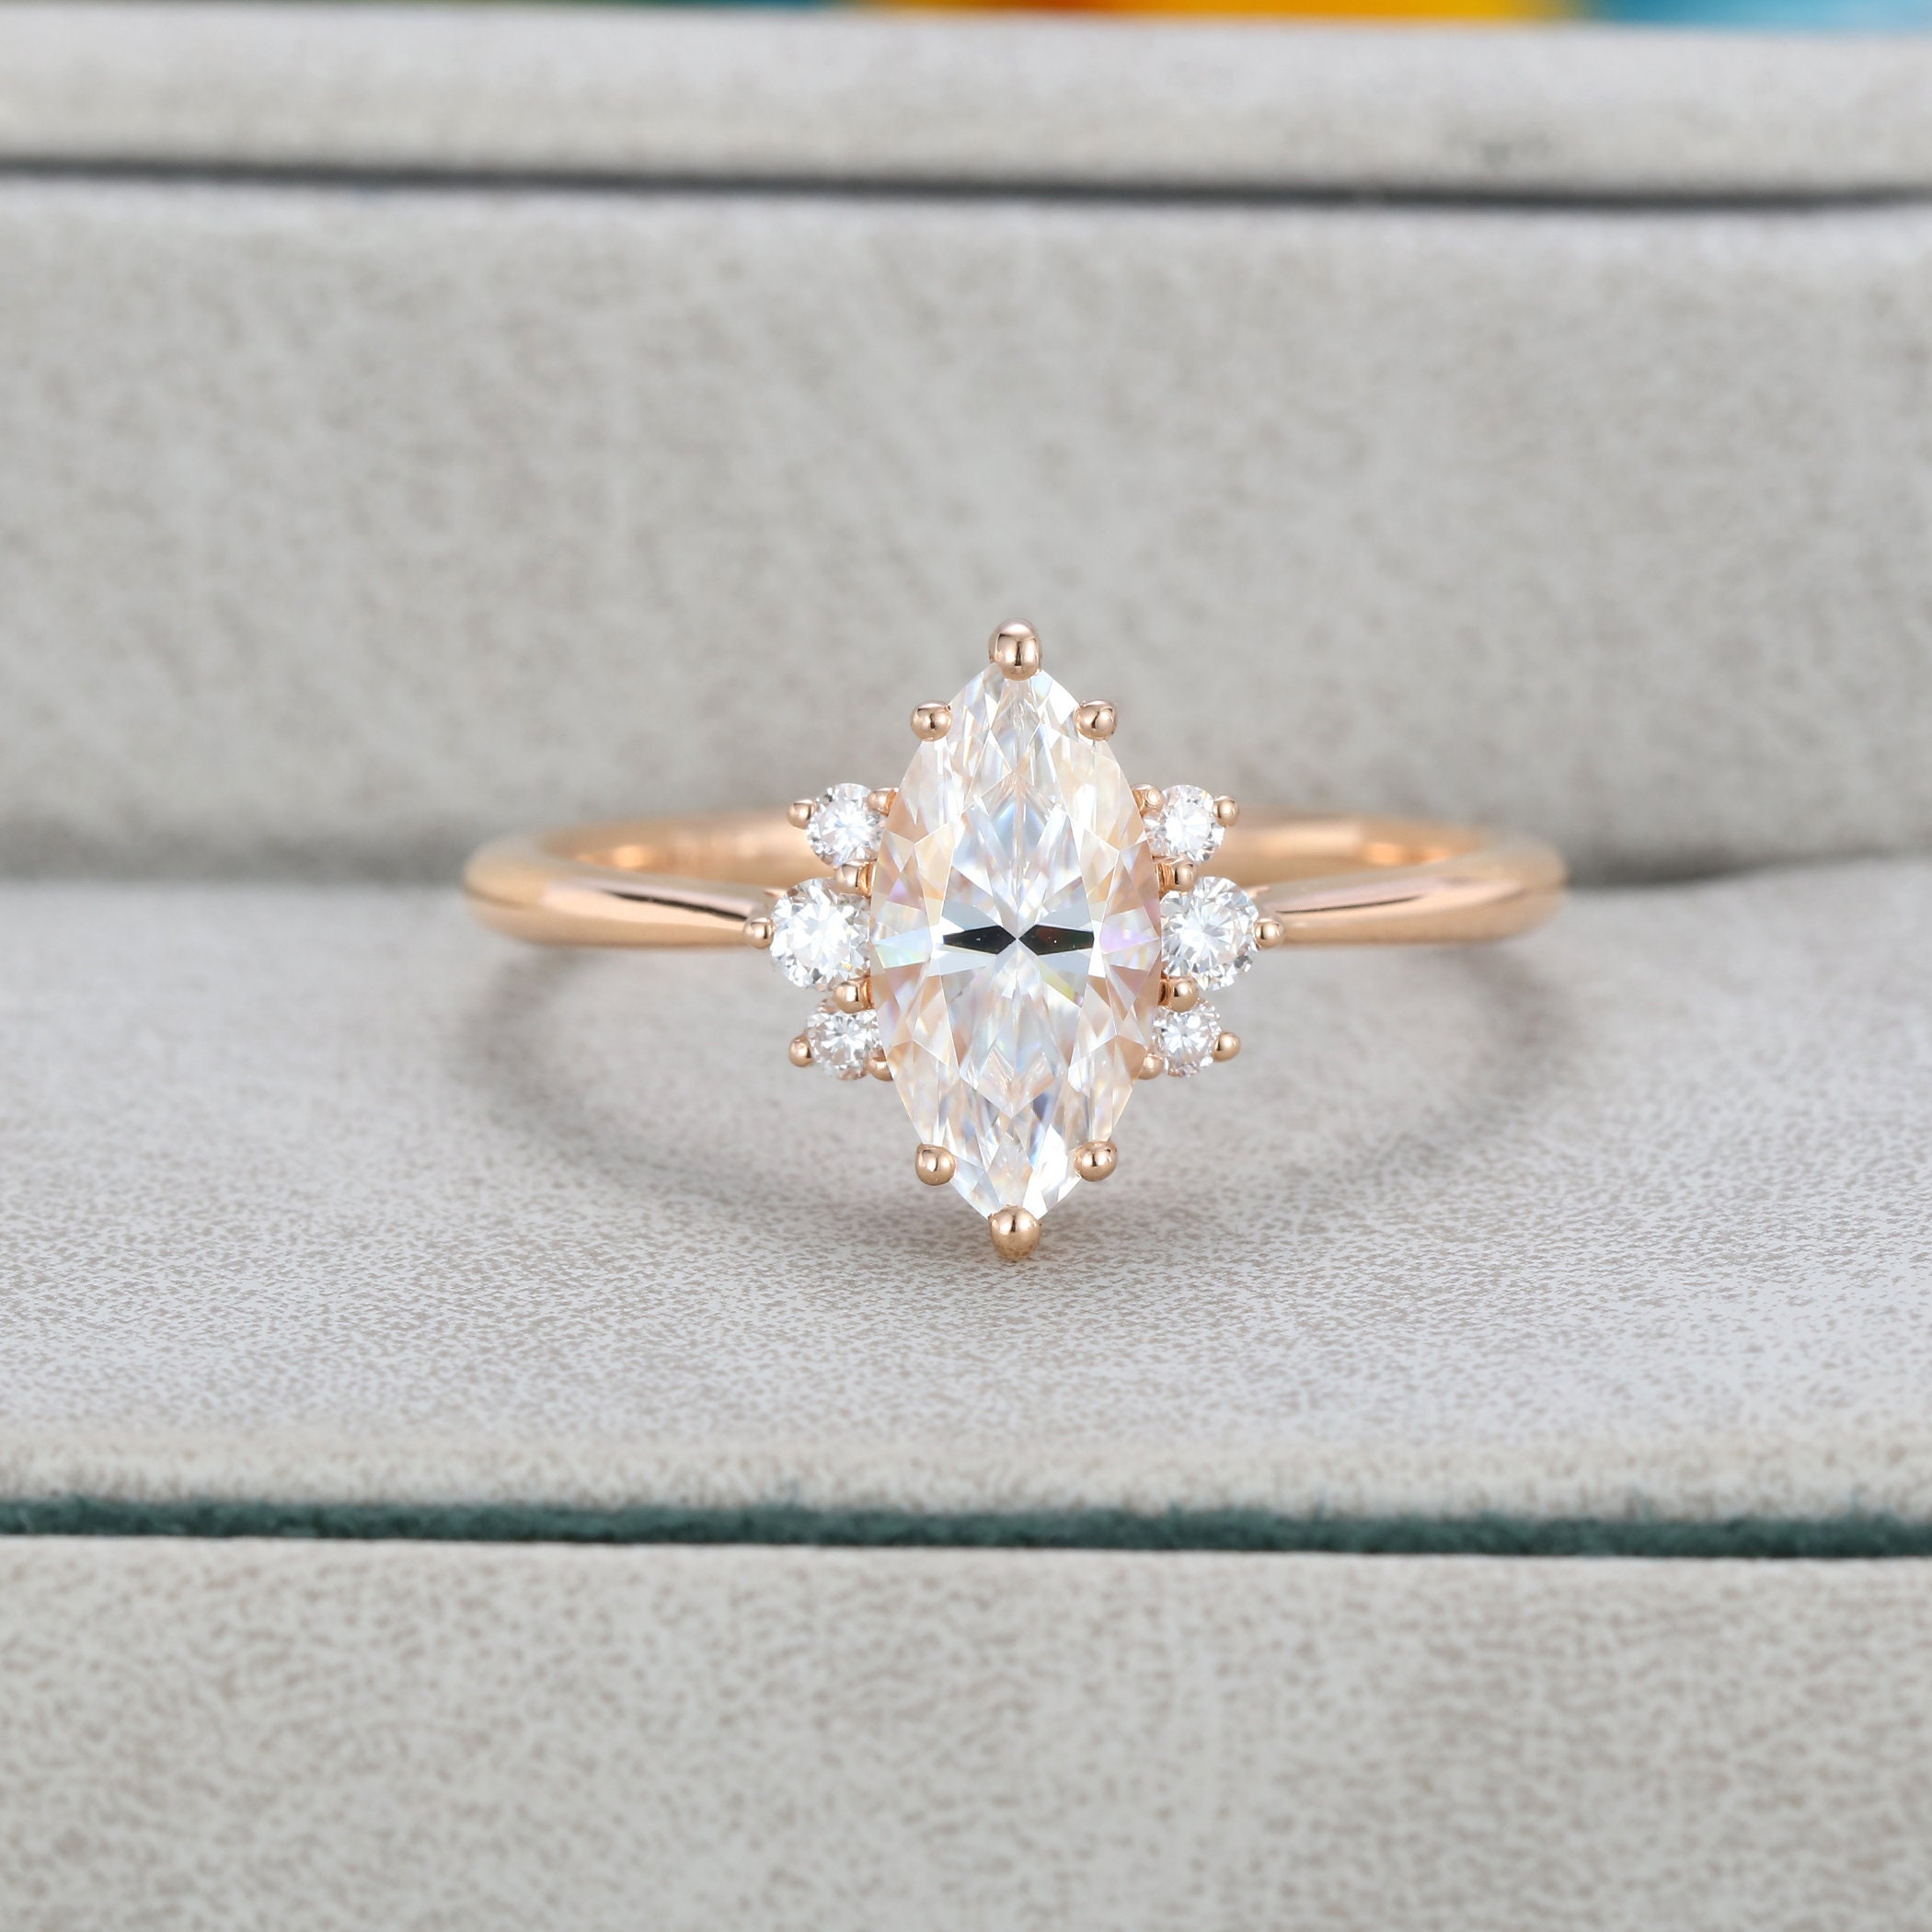 Marquise cut moissanite engagement ring rose gold engagement | Etsy